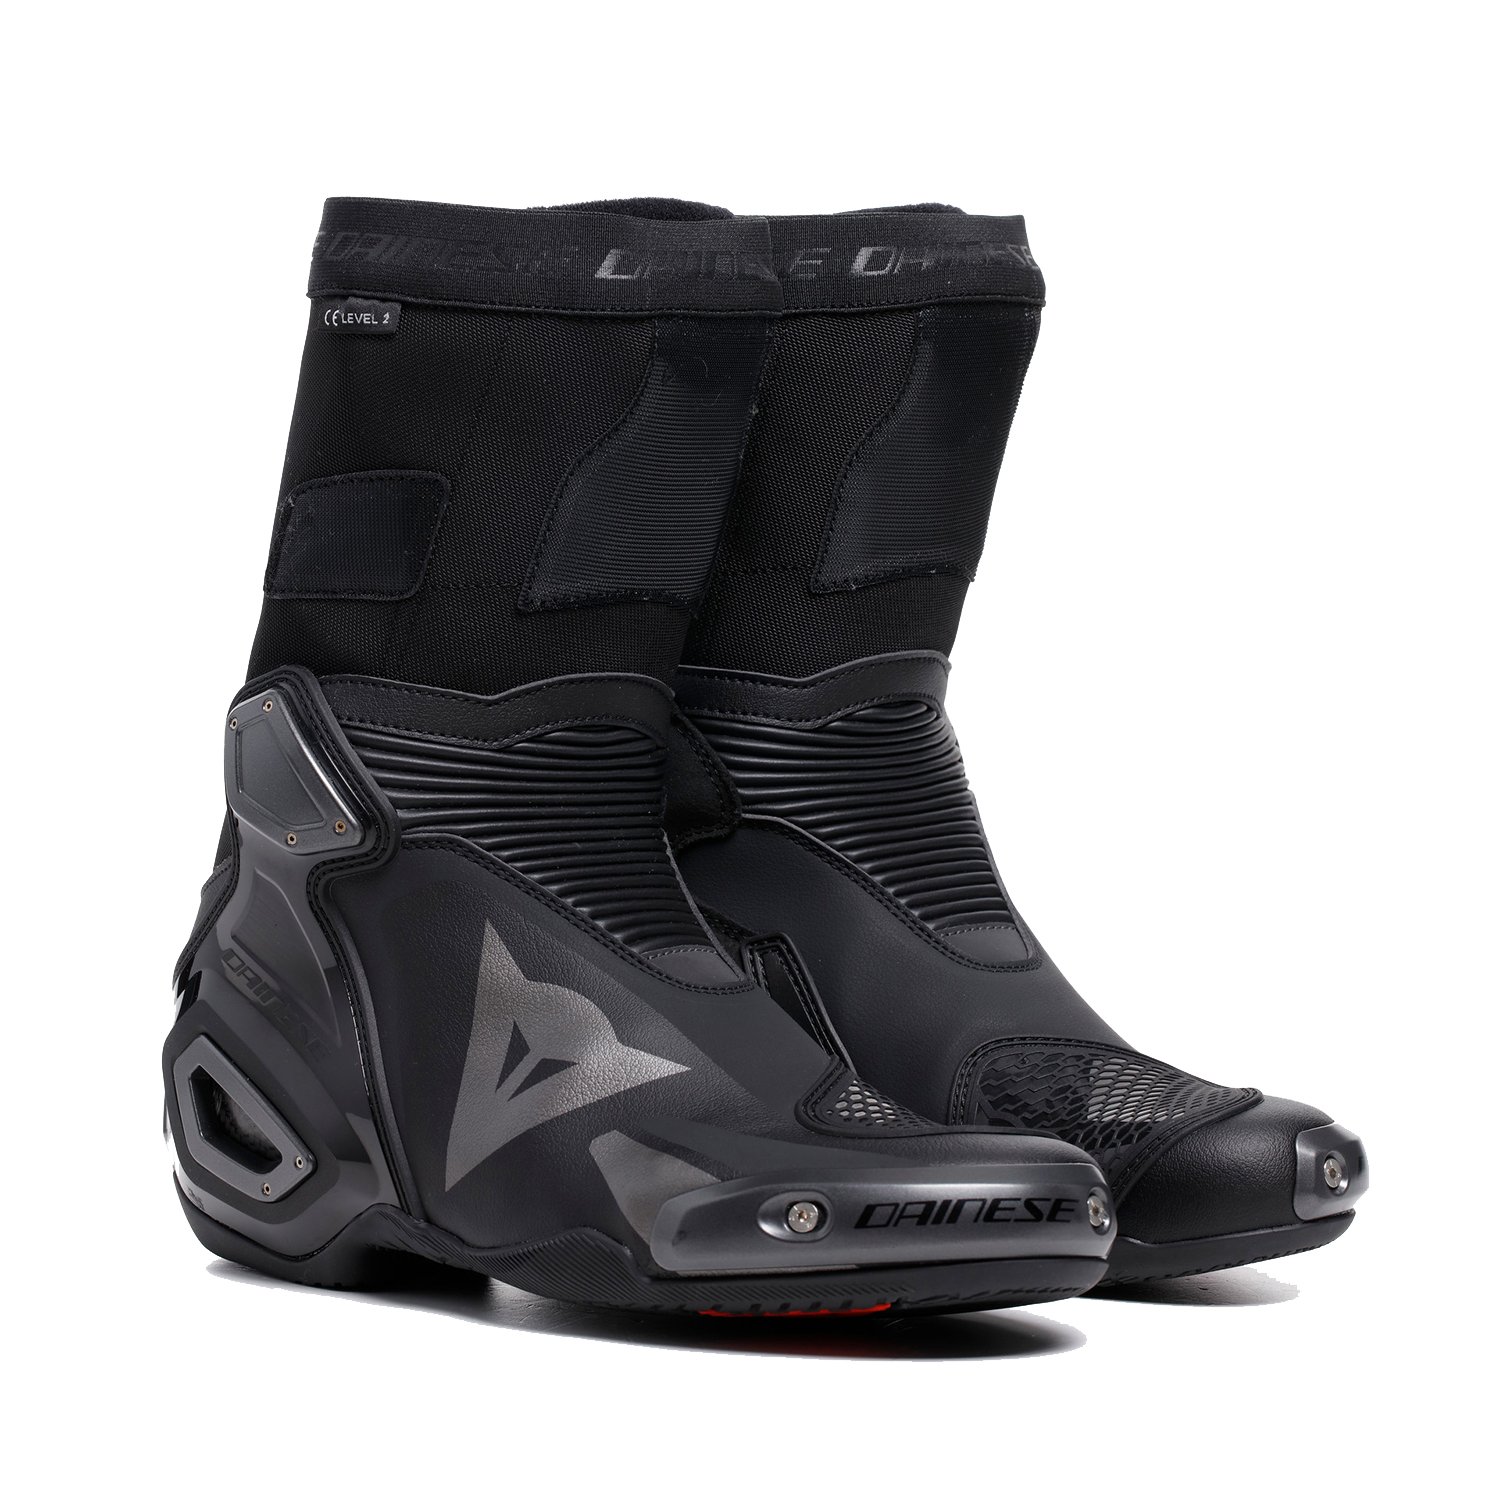 Image of Dainese Axial 2 Boots Black Size 40 EN